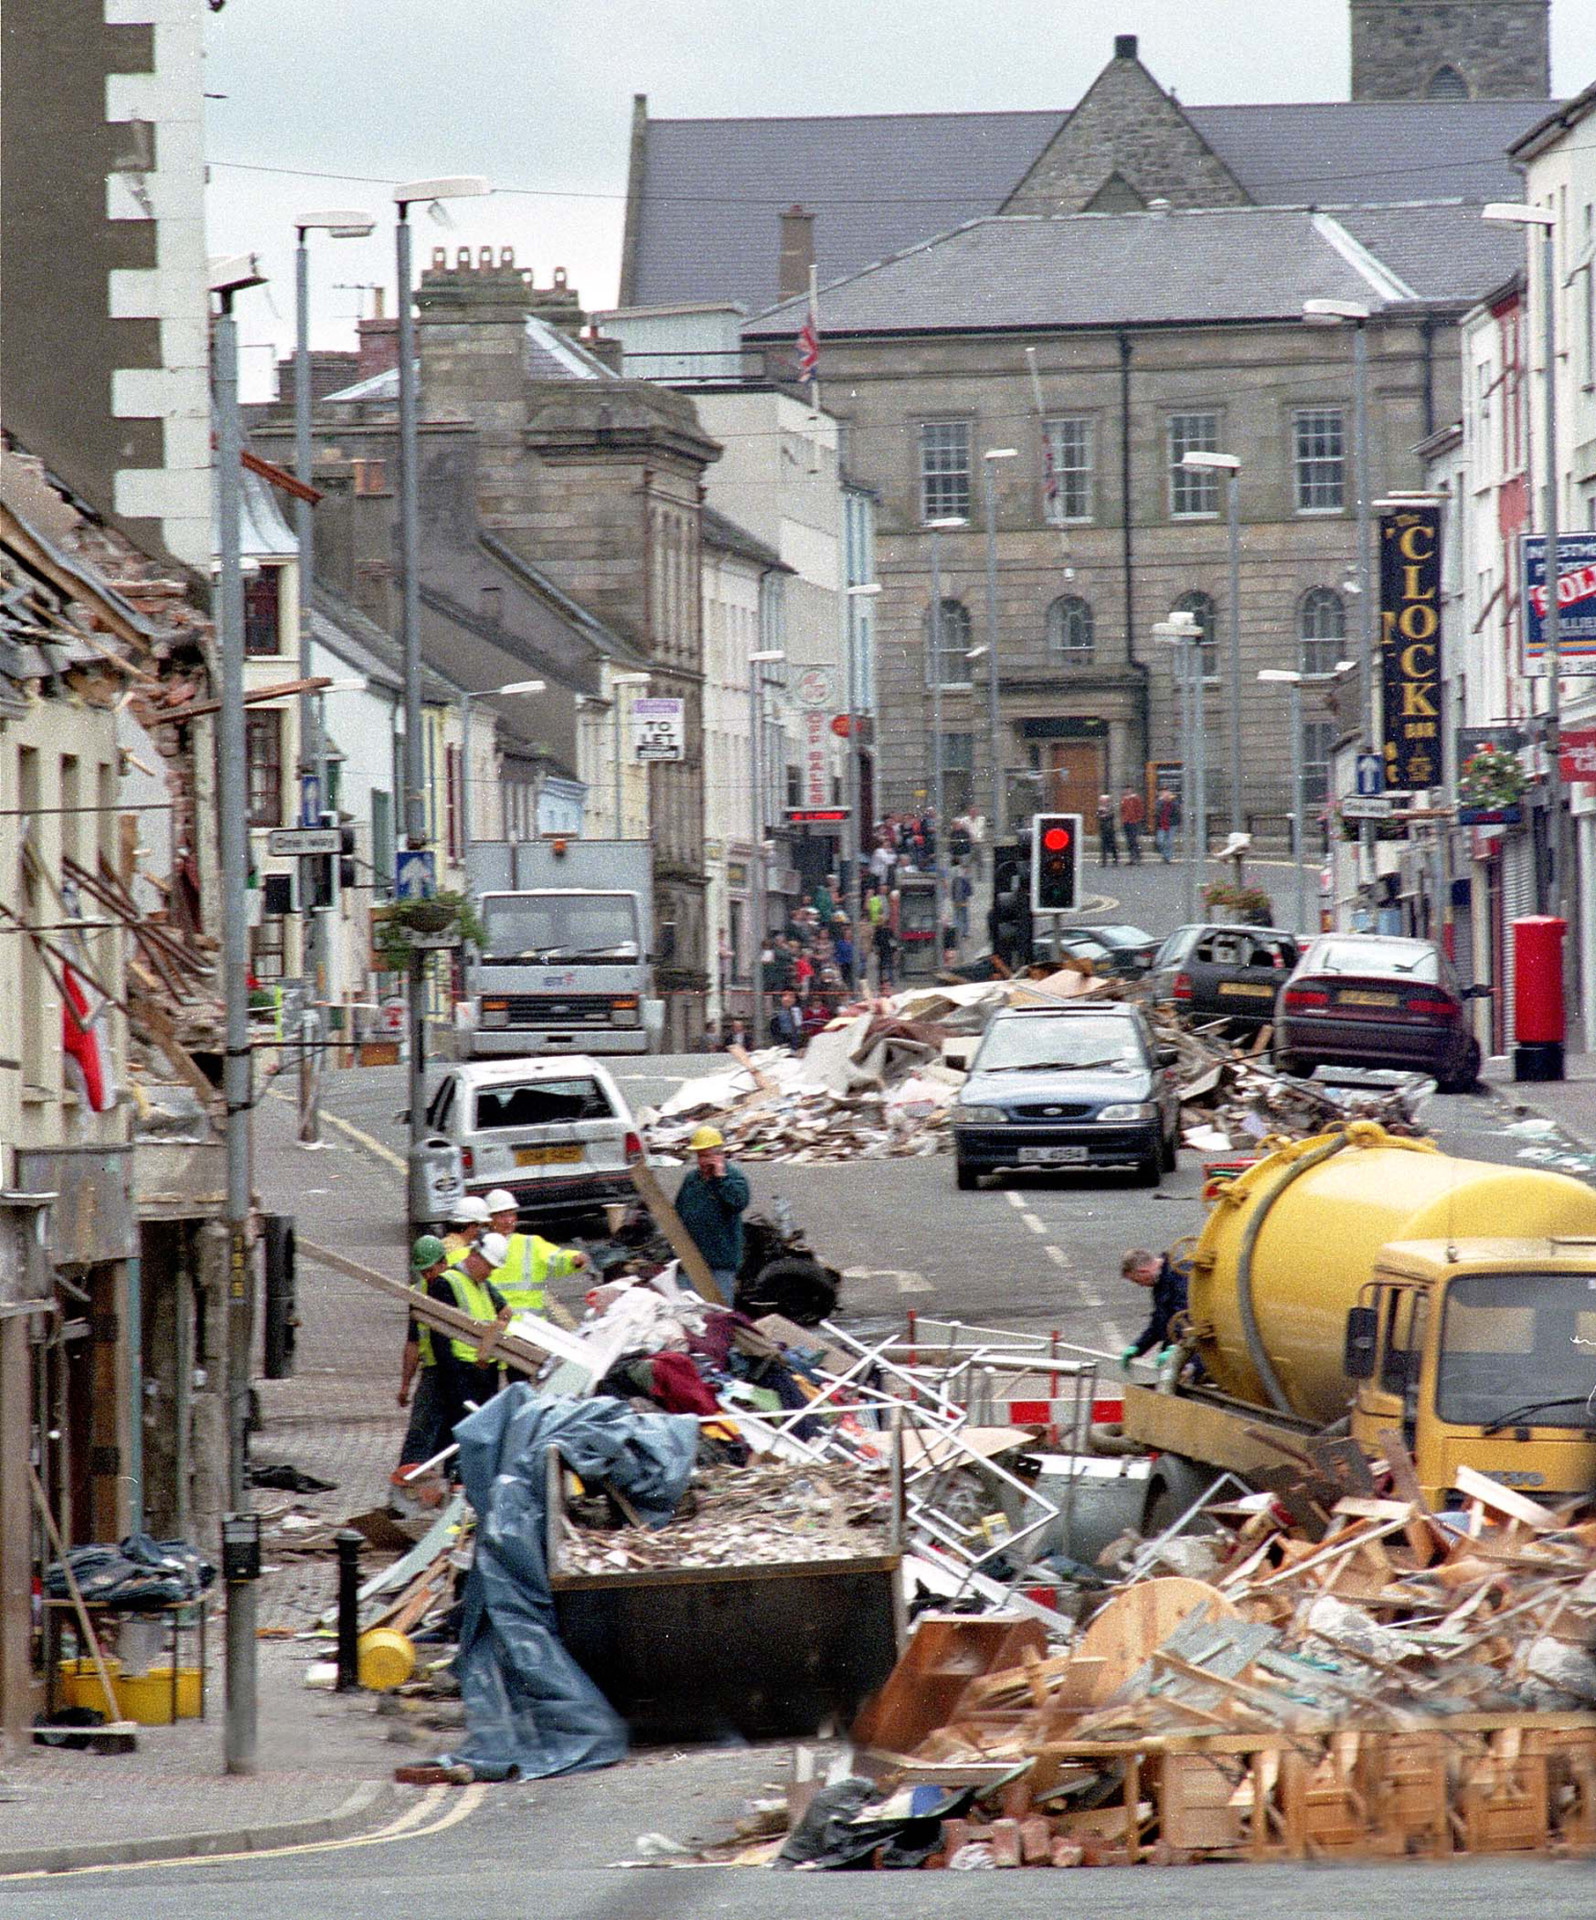 Irish inquiry into Omagh bomb would be ‘beneficial’ claims O’Loan